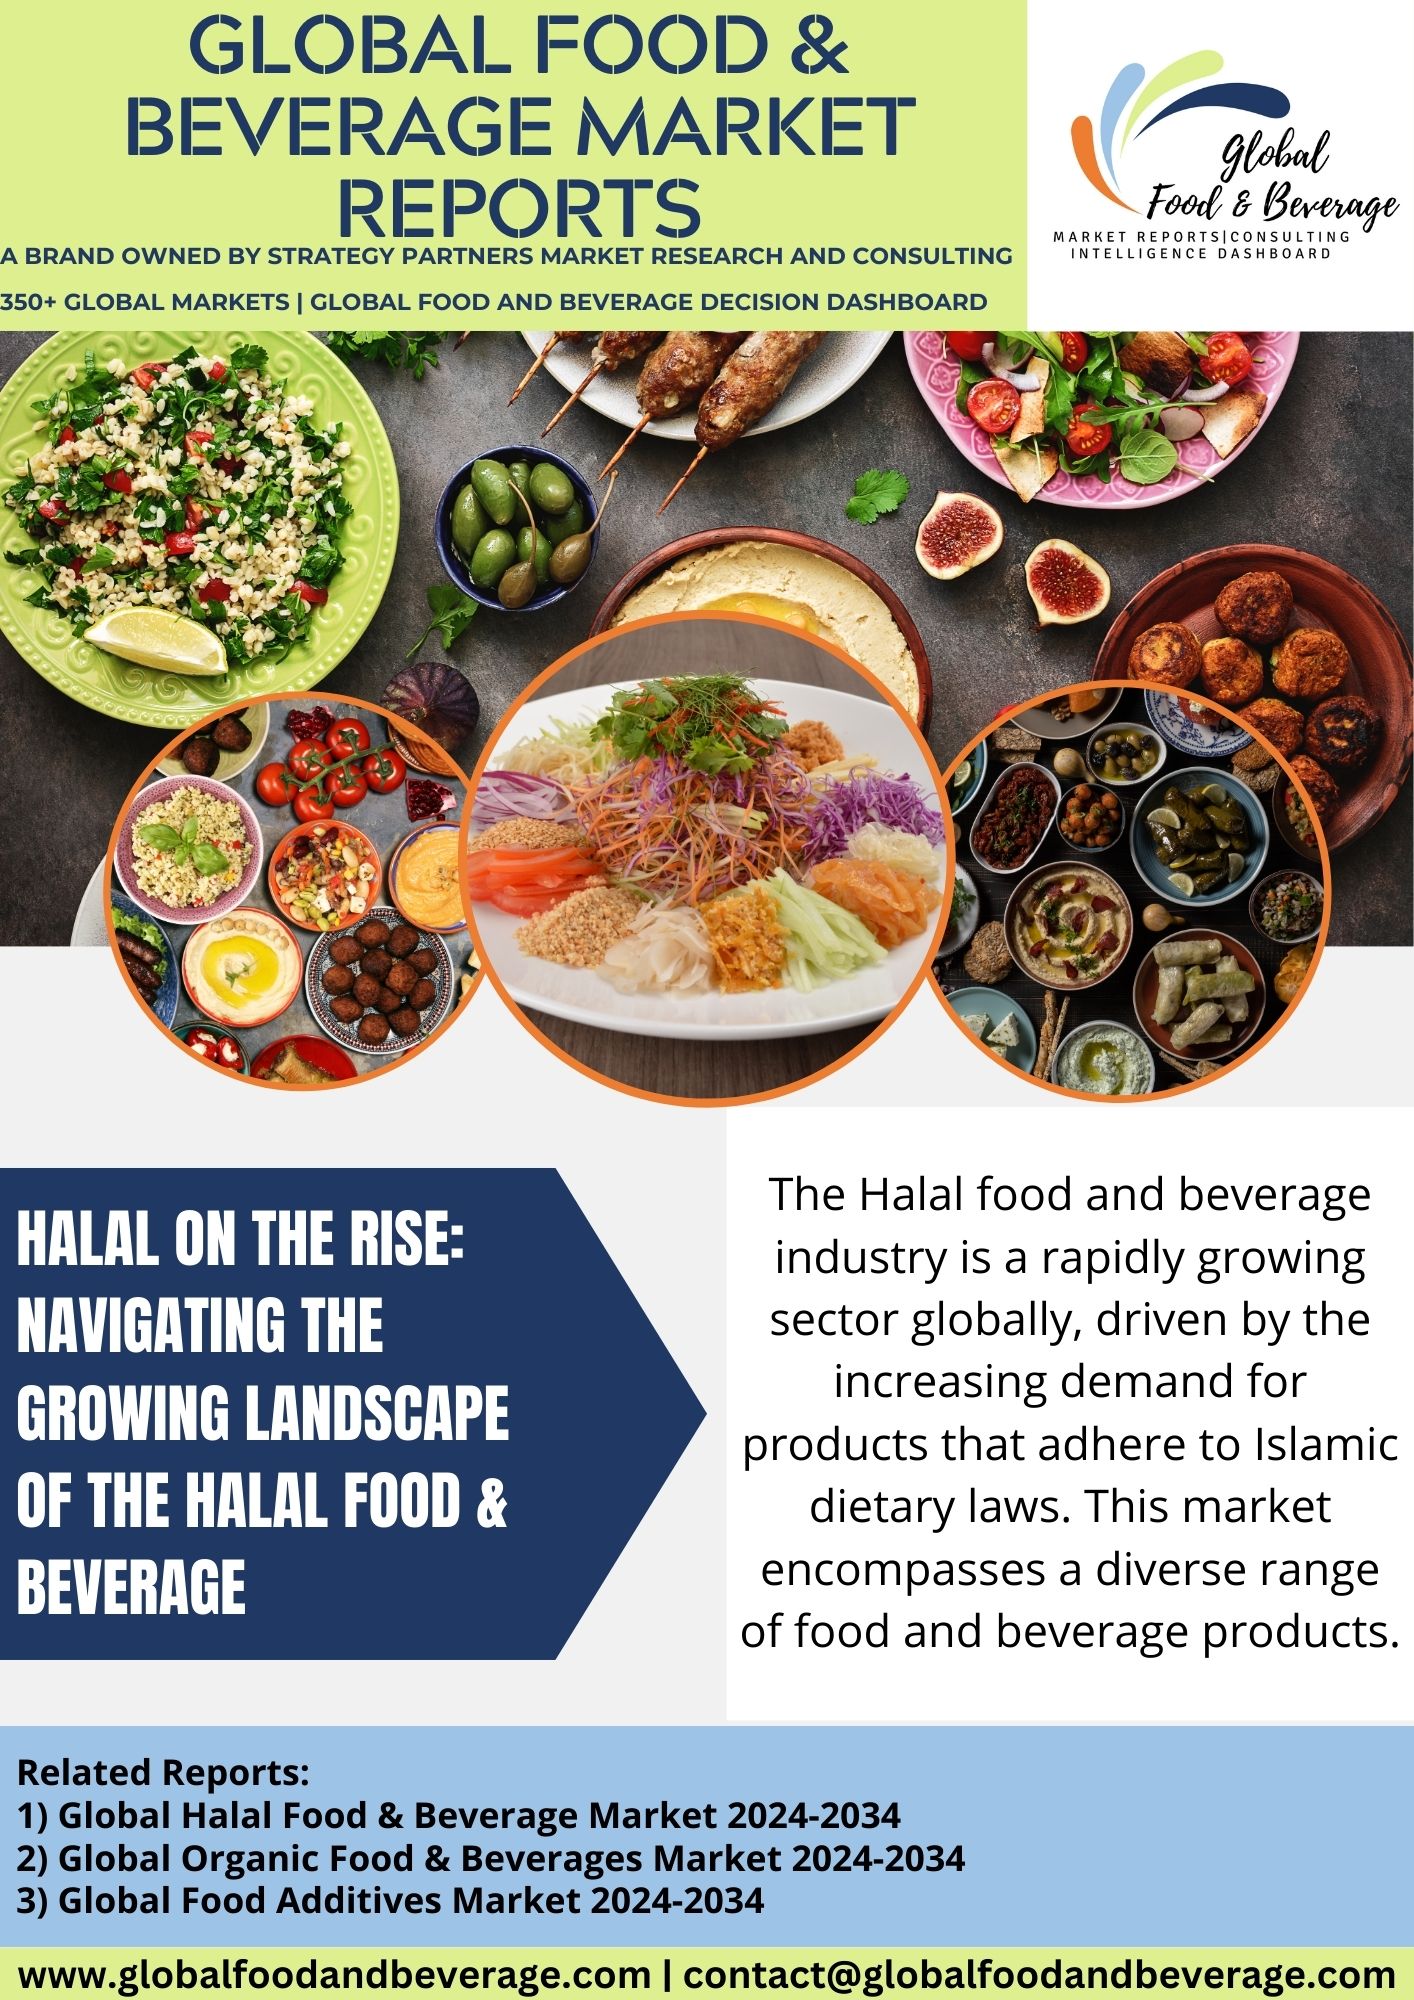 4 Reasons the Halal Food Industry is Booming